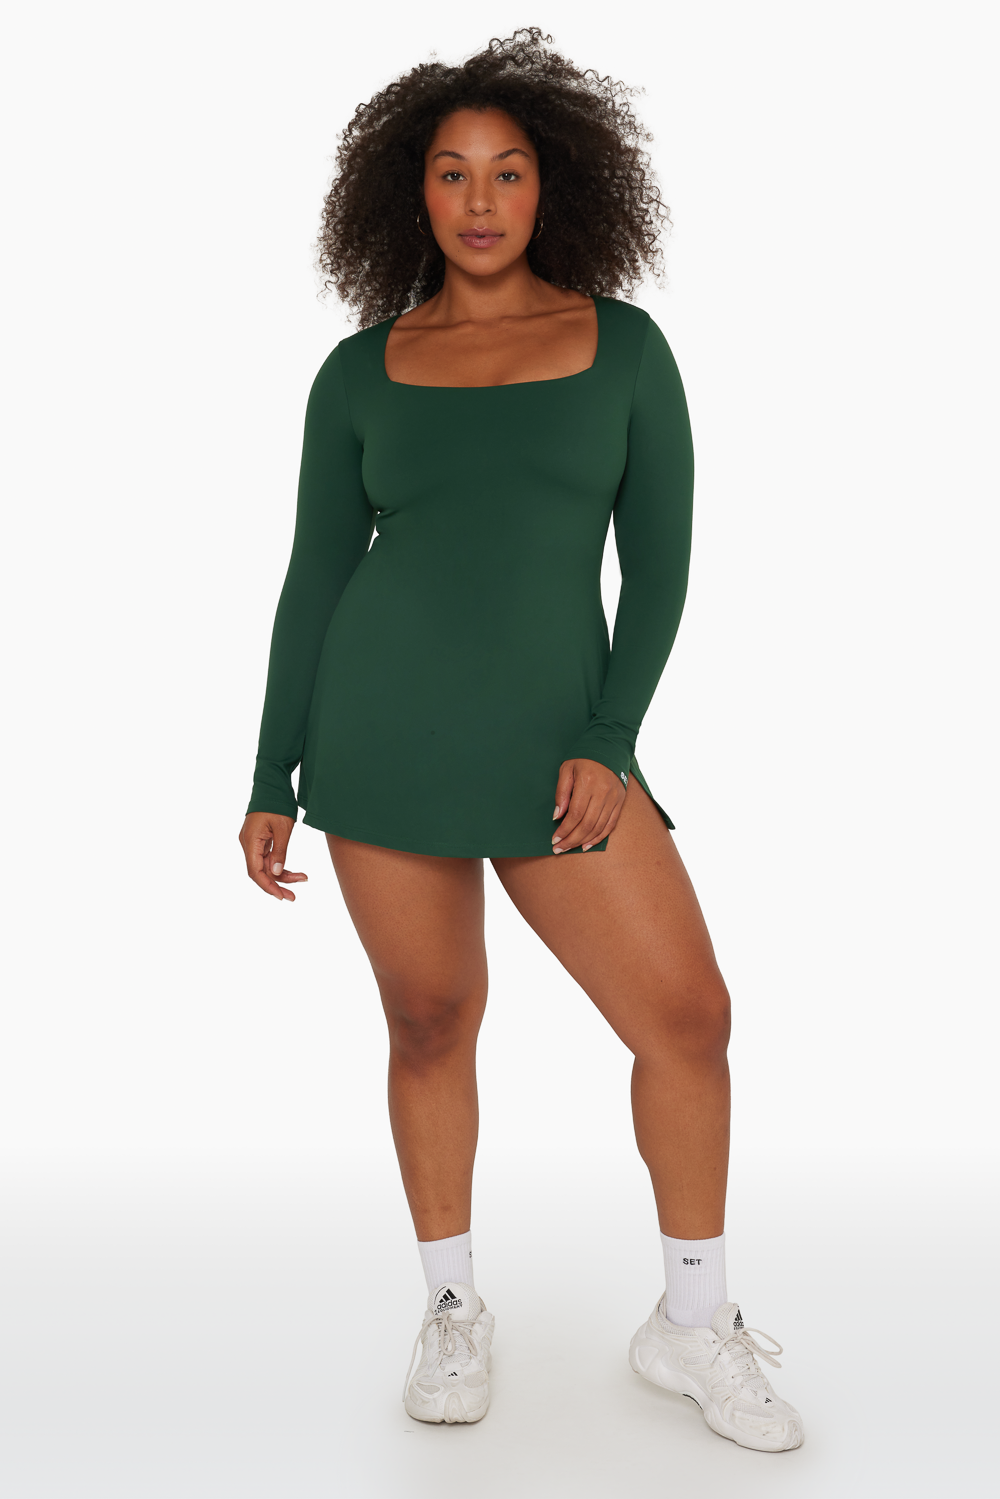 SET™ SPORTBODY® CROSSOVER DRESS IN SYCAMORE